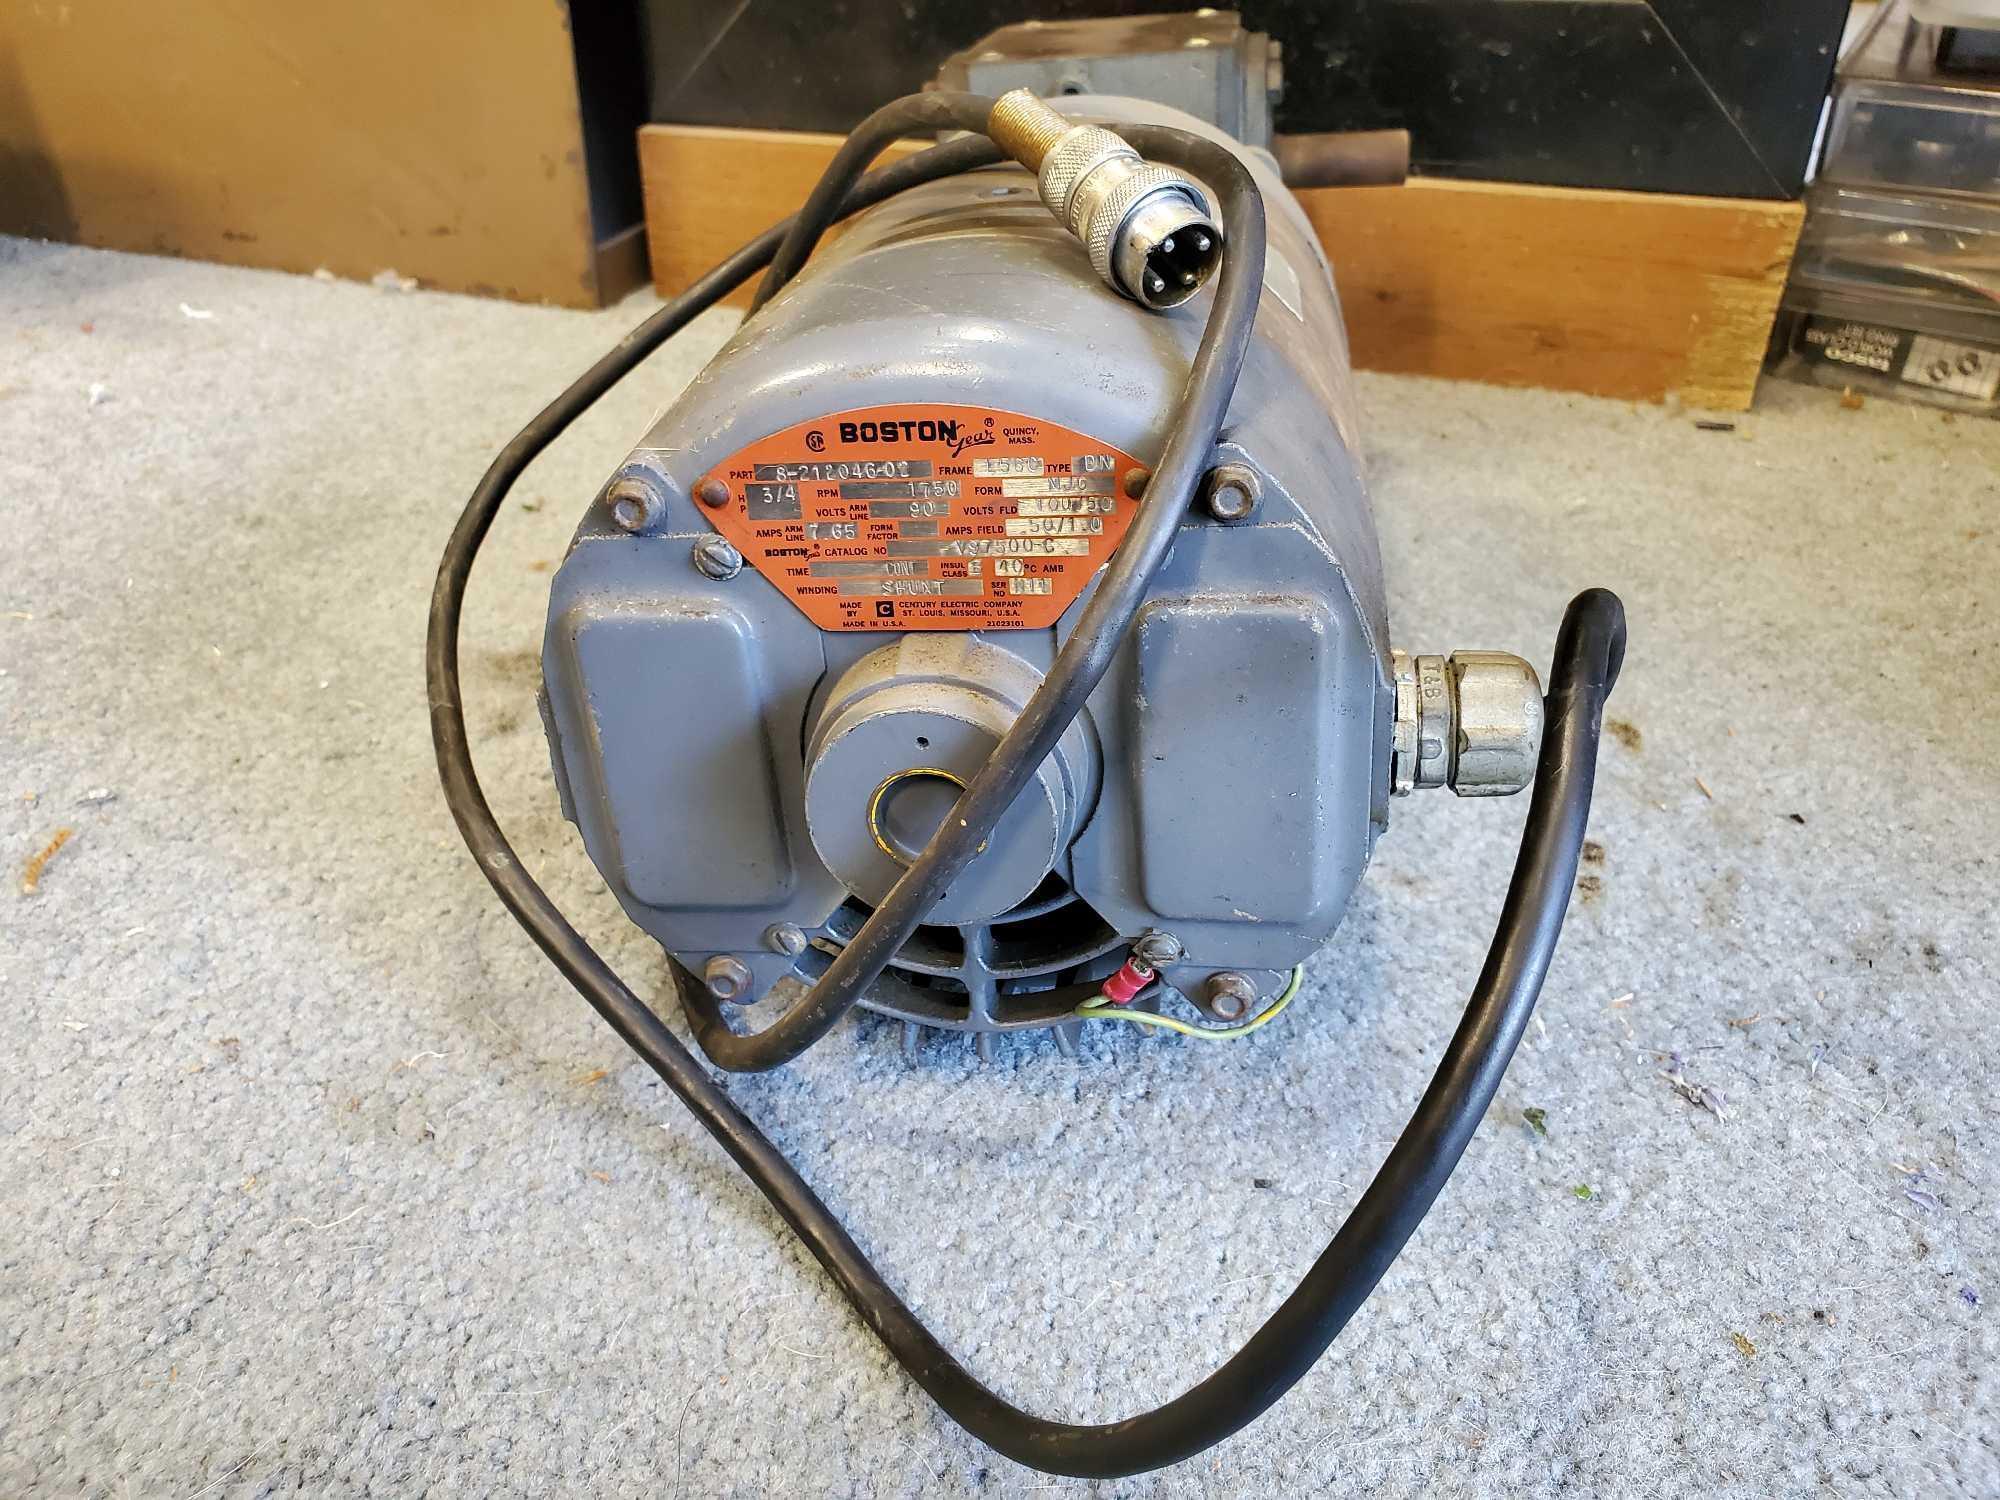 BOSTON GEAR 3/4 HP ELECTRIC MOTOR WITH REDUCTOR